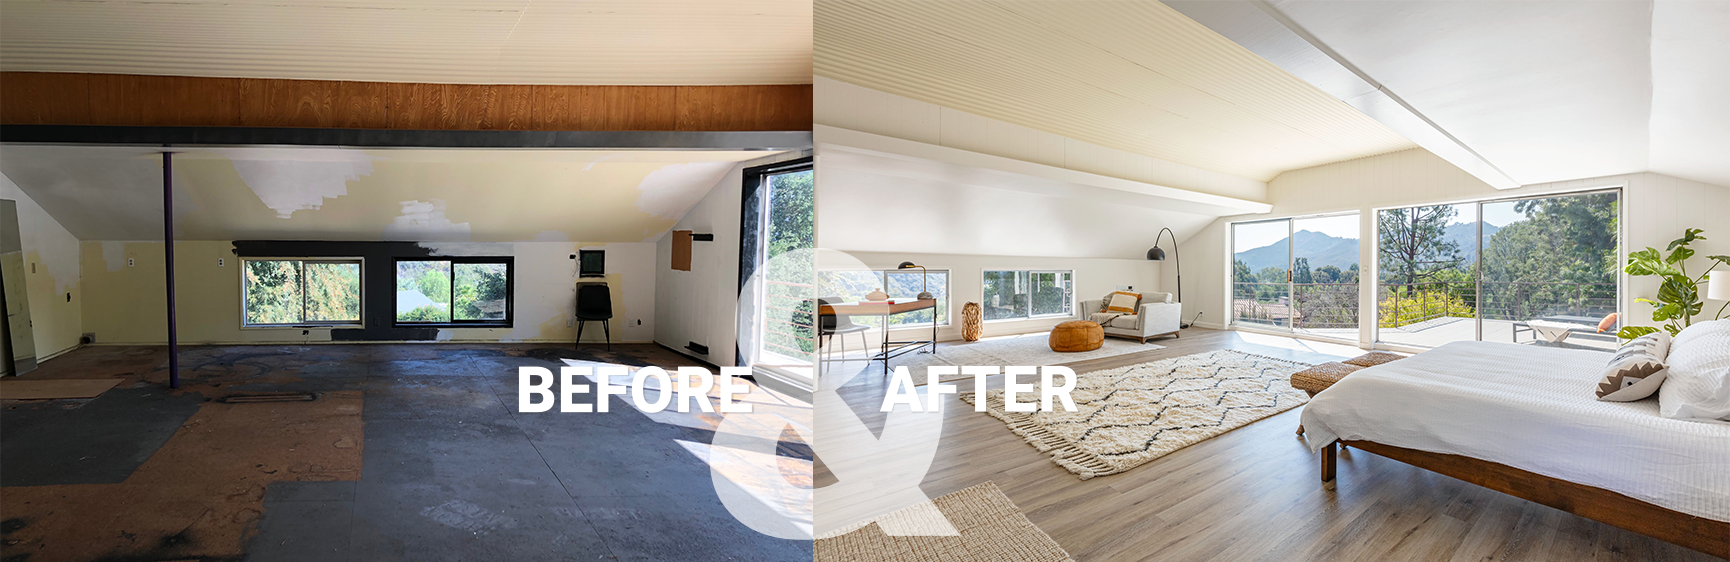 home-renovation-before-and-after